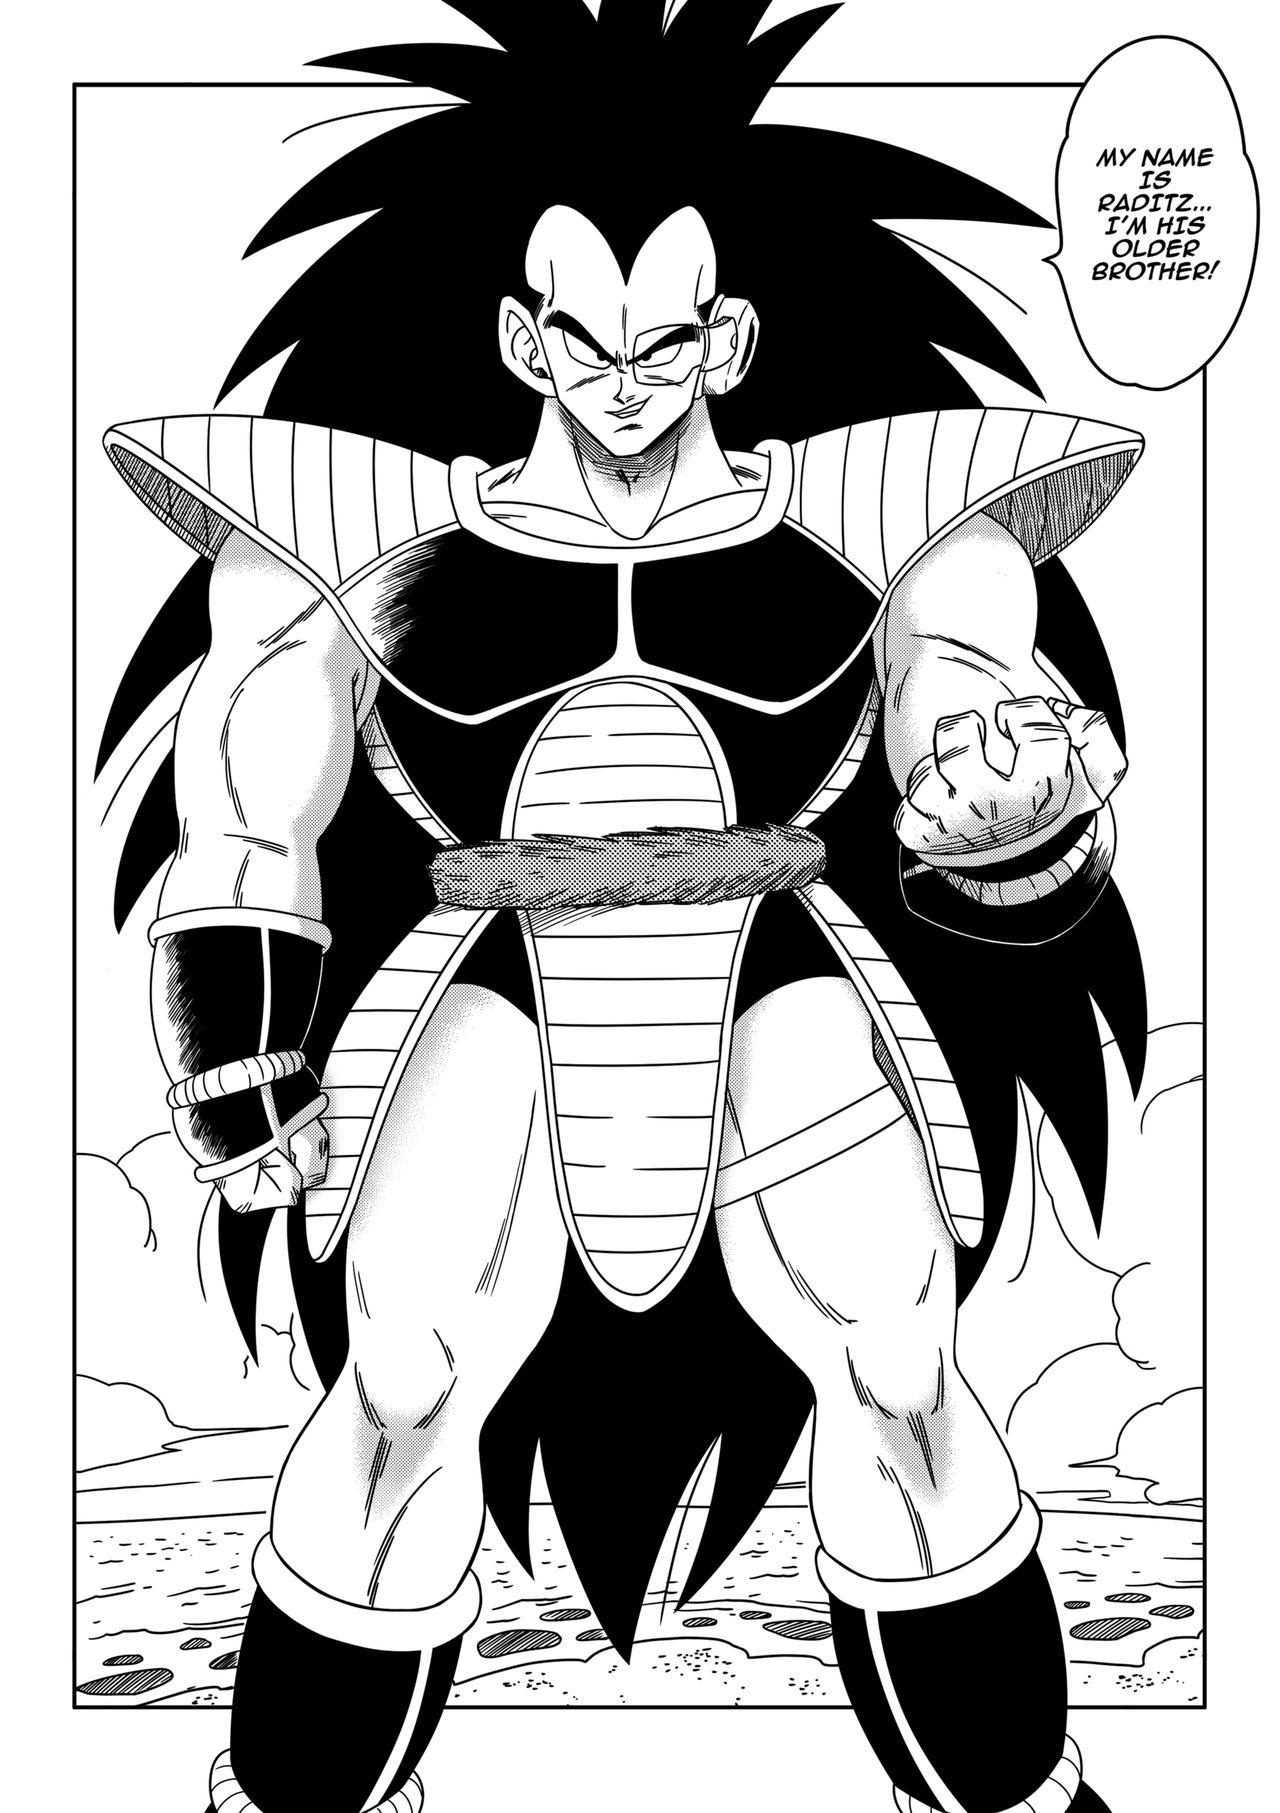 Amazing The Evil Brother - Dragon ball z Online - Page 4